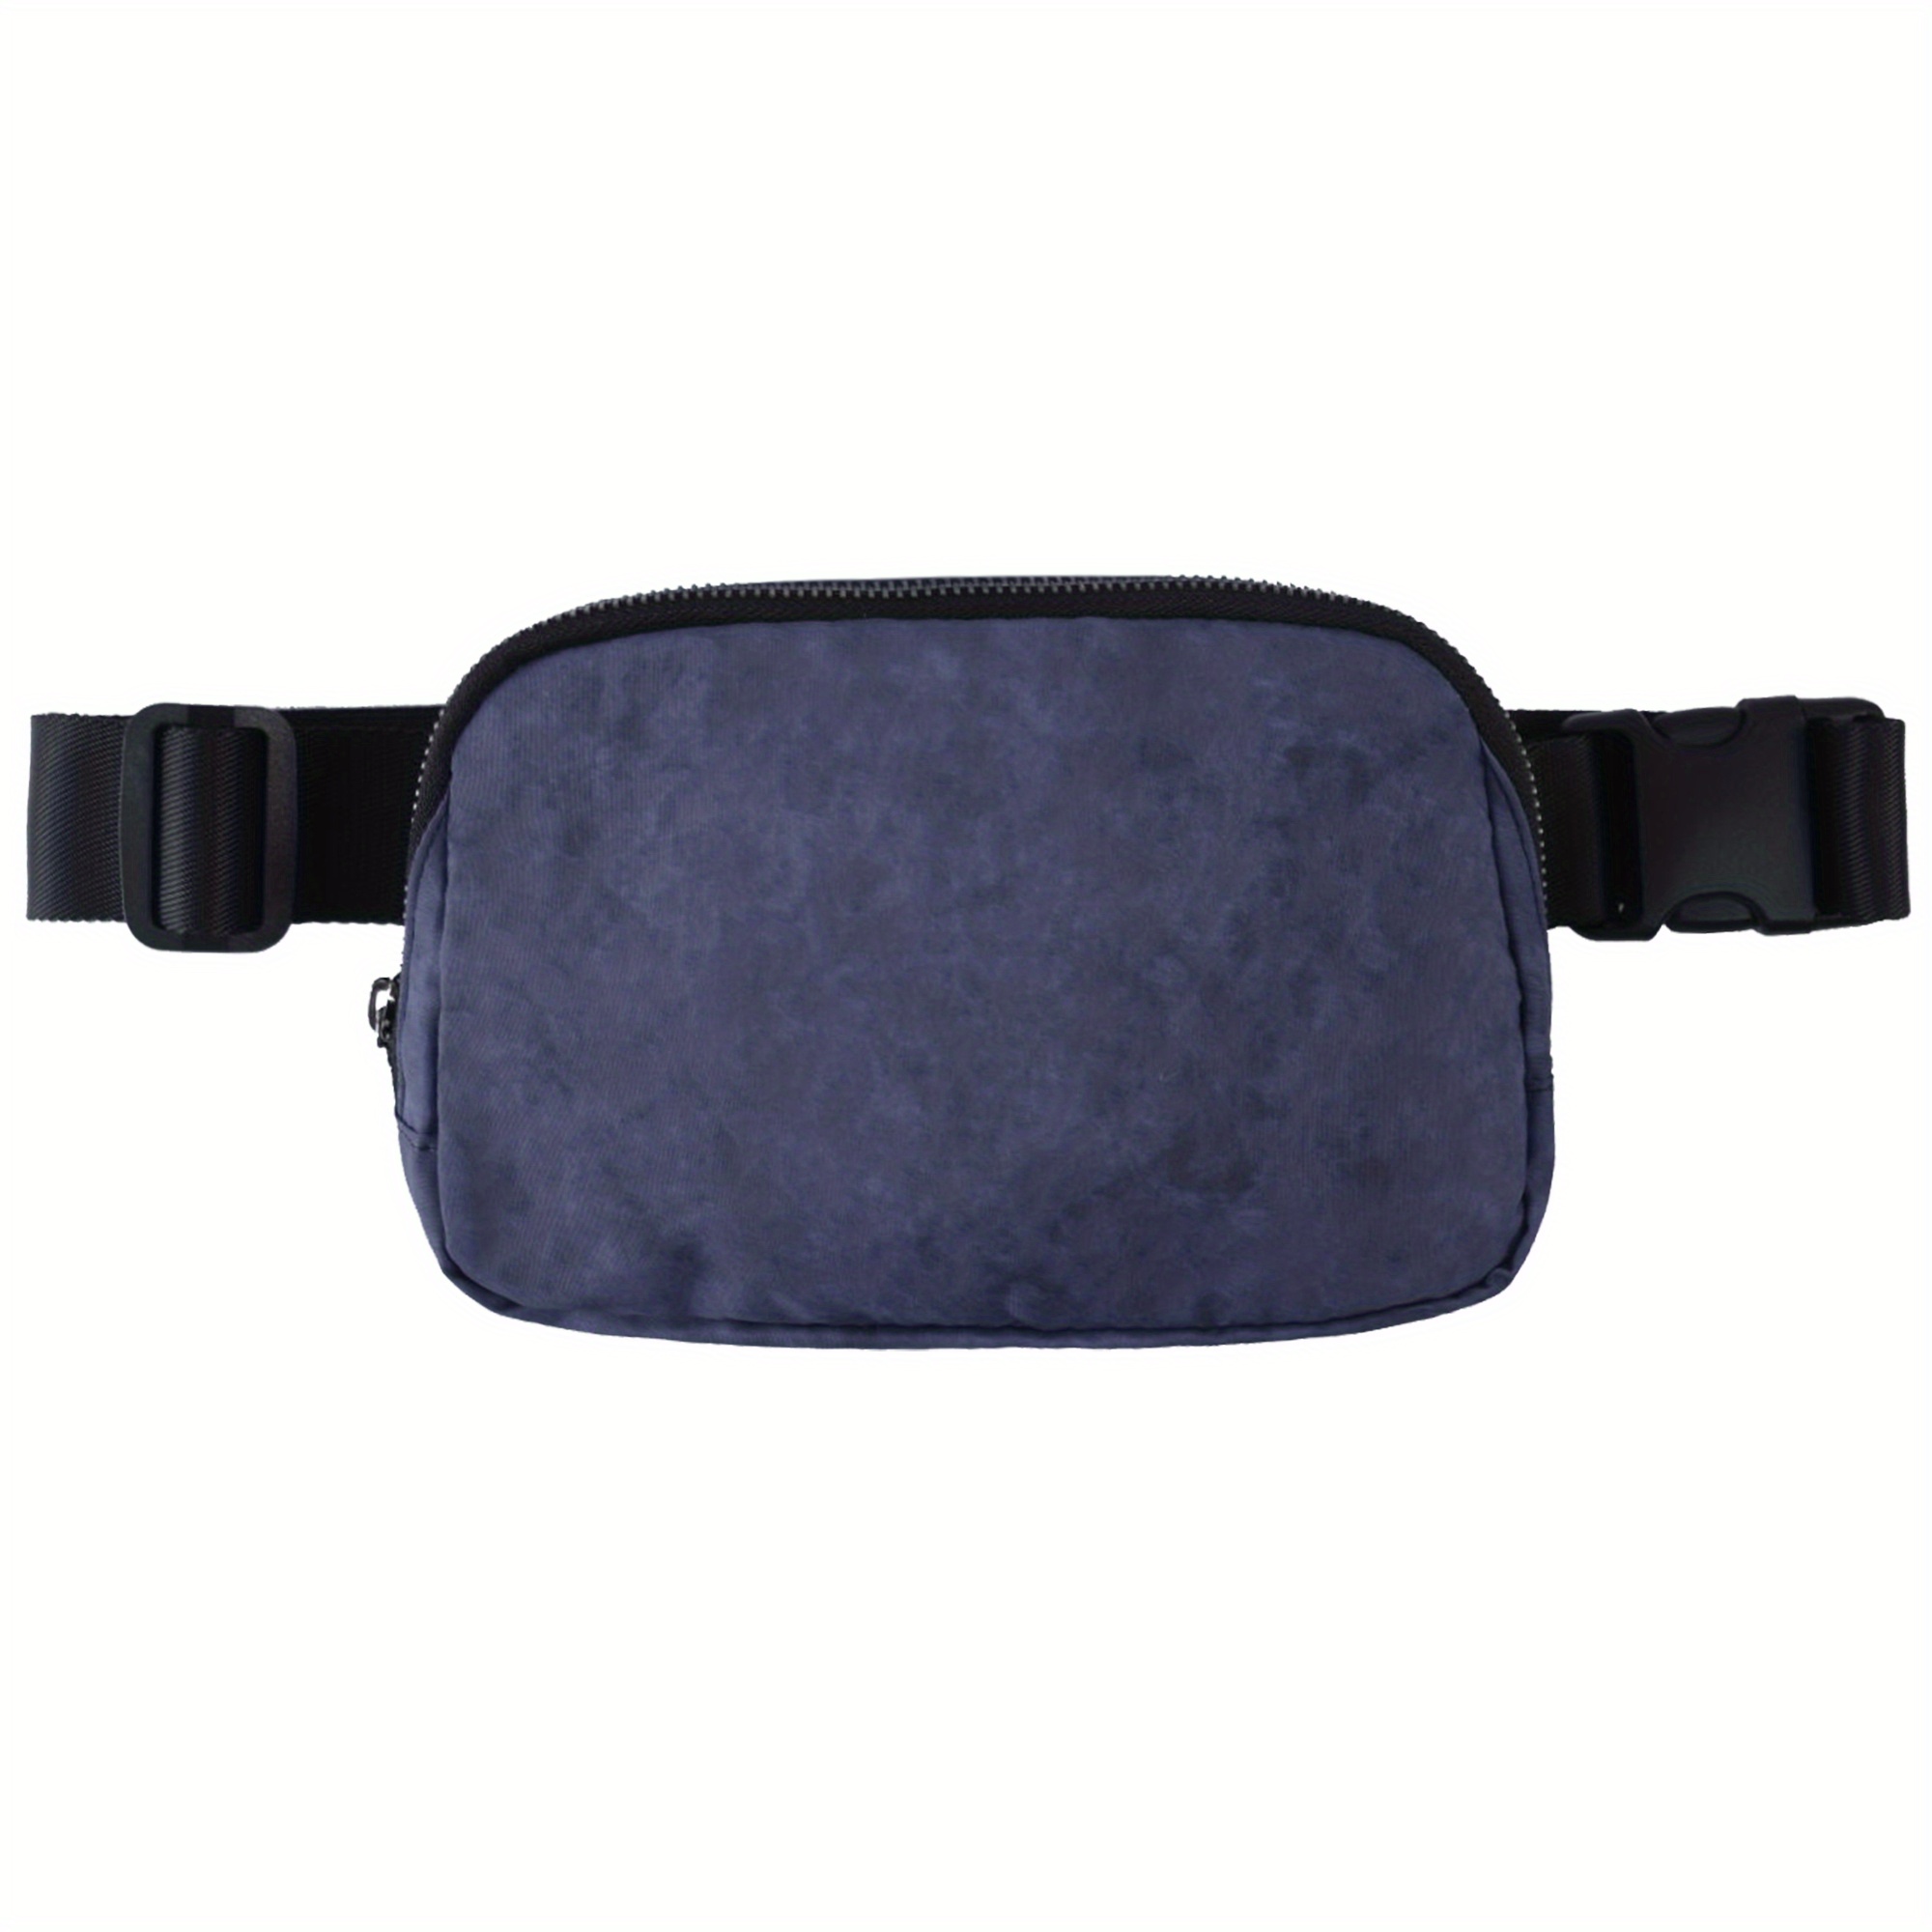 BESTSPR Unisex Mini Belt Bag with Adjustable Strap Small Waist Pouch for  Workout Running Travelling Hiking，Steel Blue